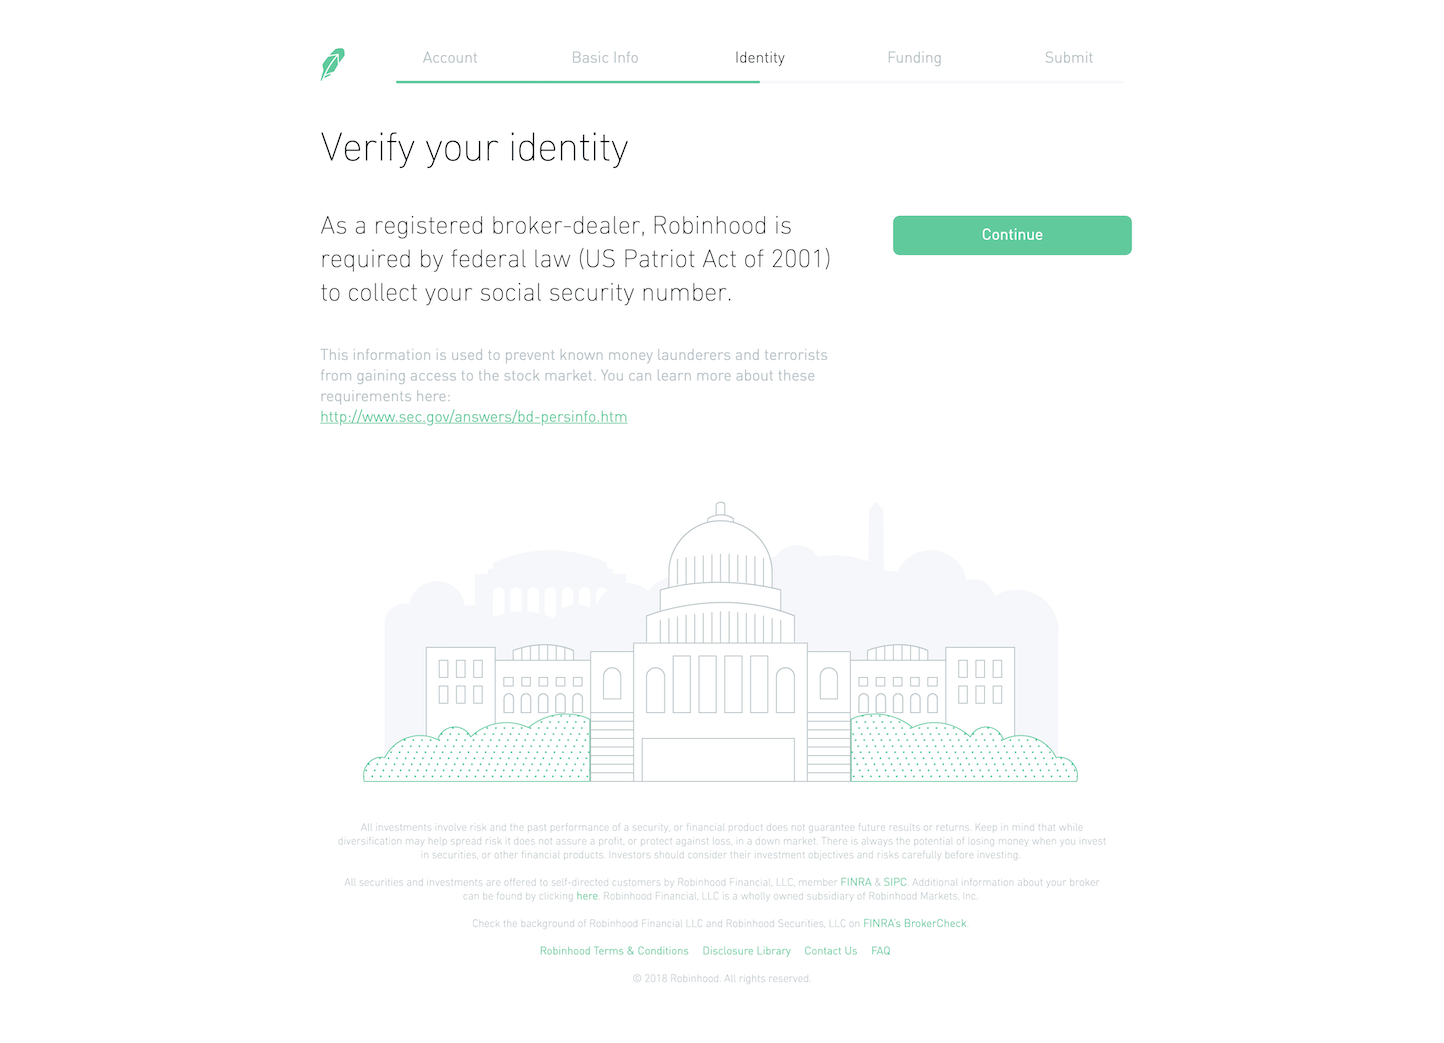 Screenshot of the Sign Up - Step 3 page from the Robinhood website.